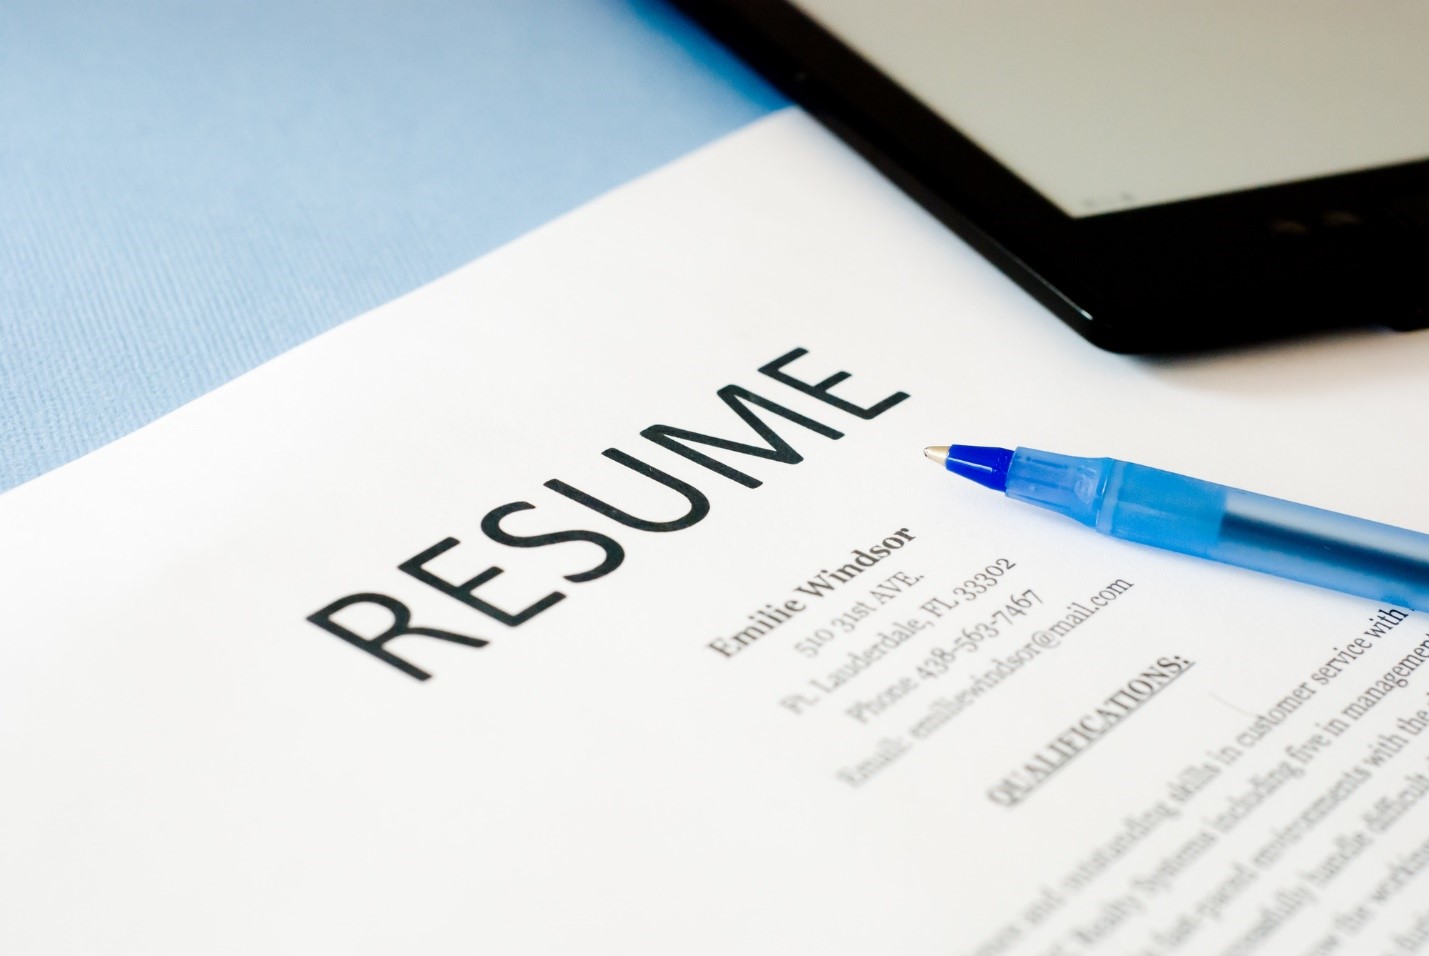 Top 5 Common Resume Mistakes According to Employers